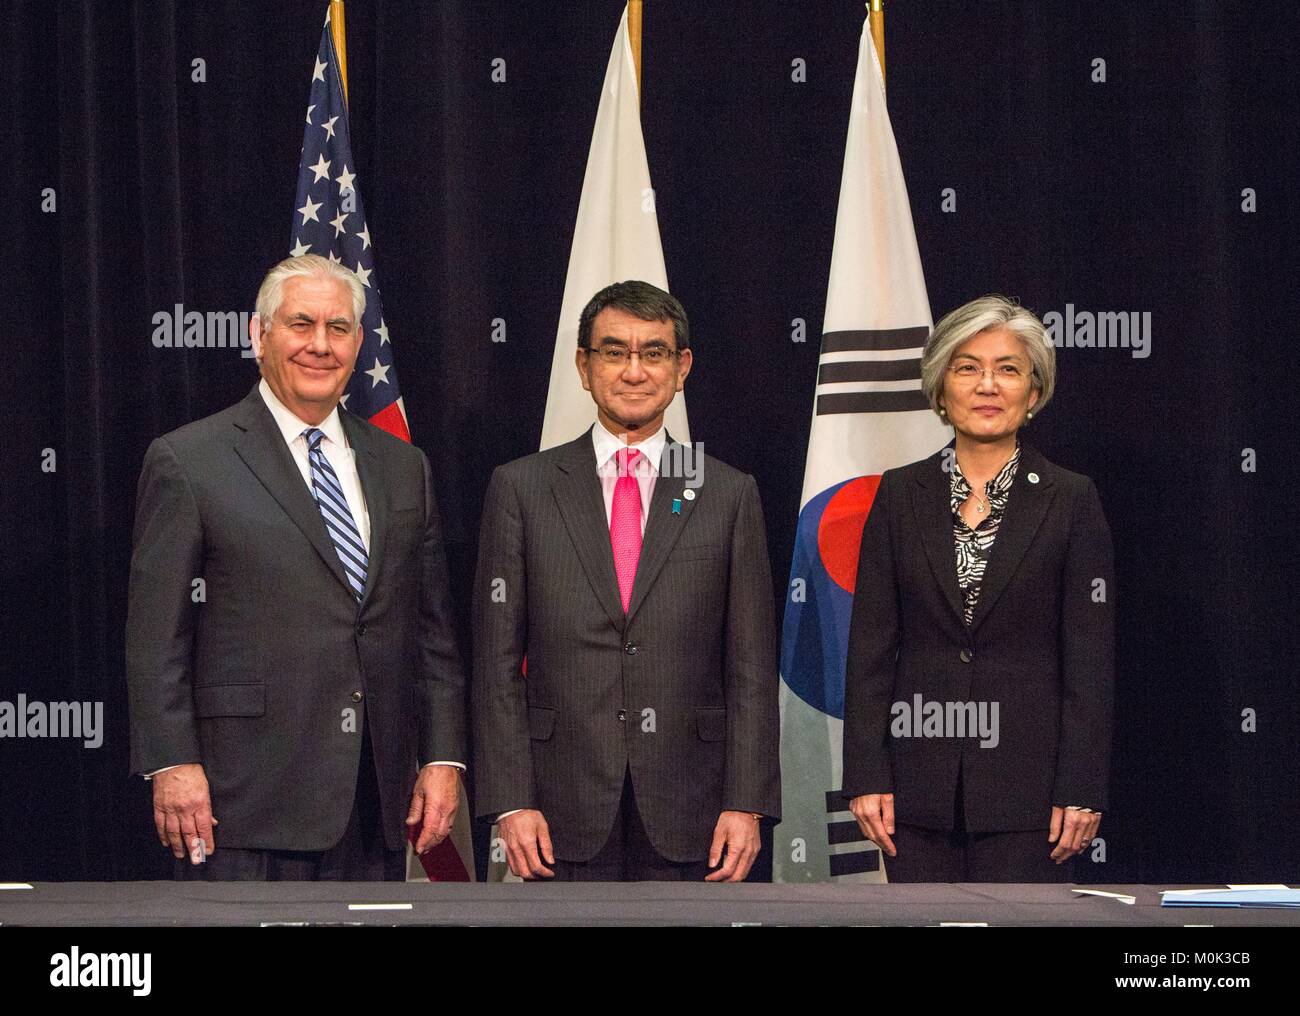 U.S. Secretary of State Rex Tillerson (left) meets with Japanese Foreign Minister Taro Kono and South Korean Foreign Minister Kang Kyung-wha during the Vancouver Foreign Ministers Meeting on Security and Stability on the Korean Peninsula January 16, 2018 in Vancouver, British Columbia, Canada. Stock Photo